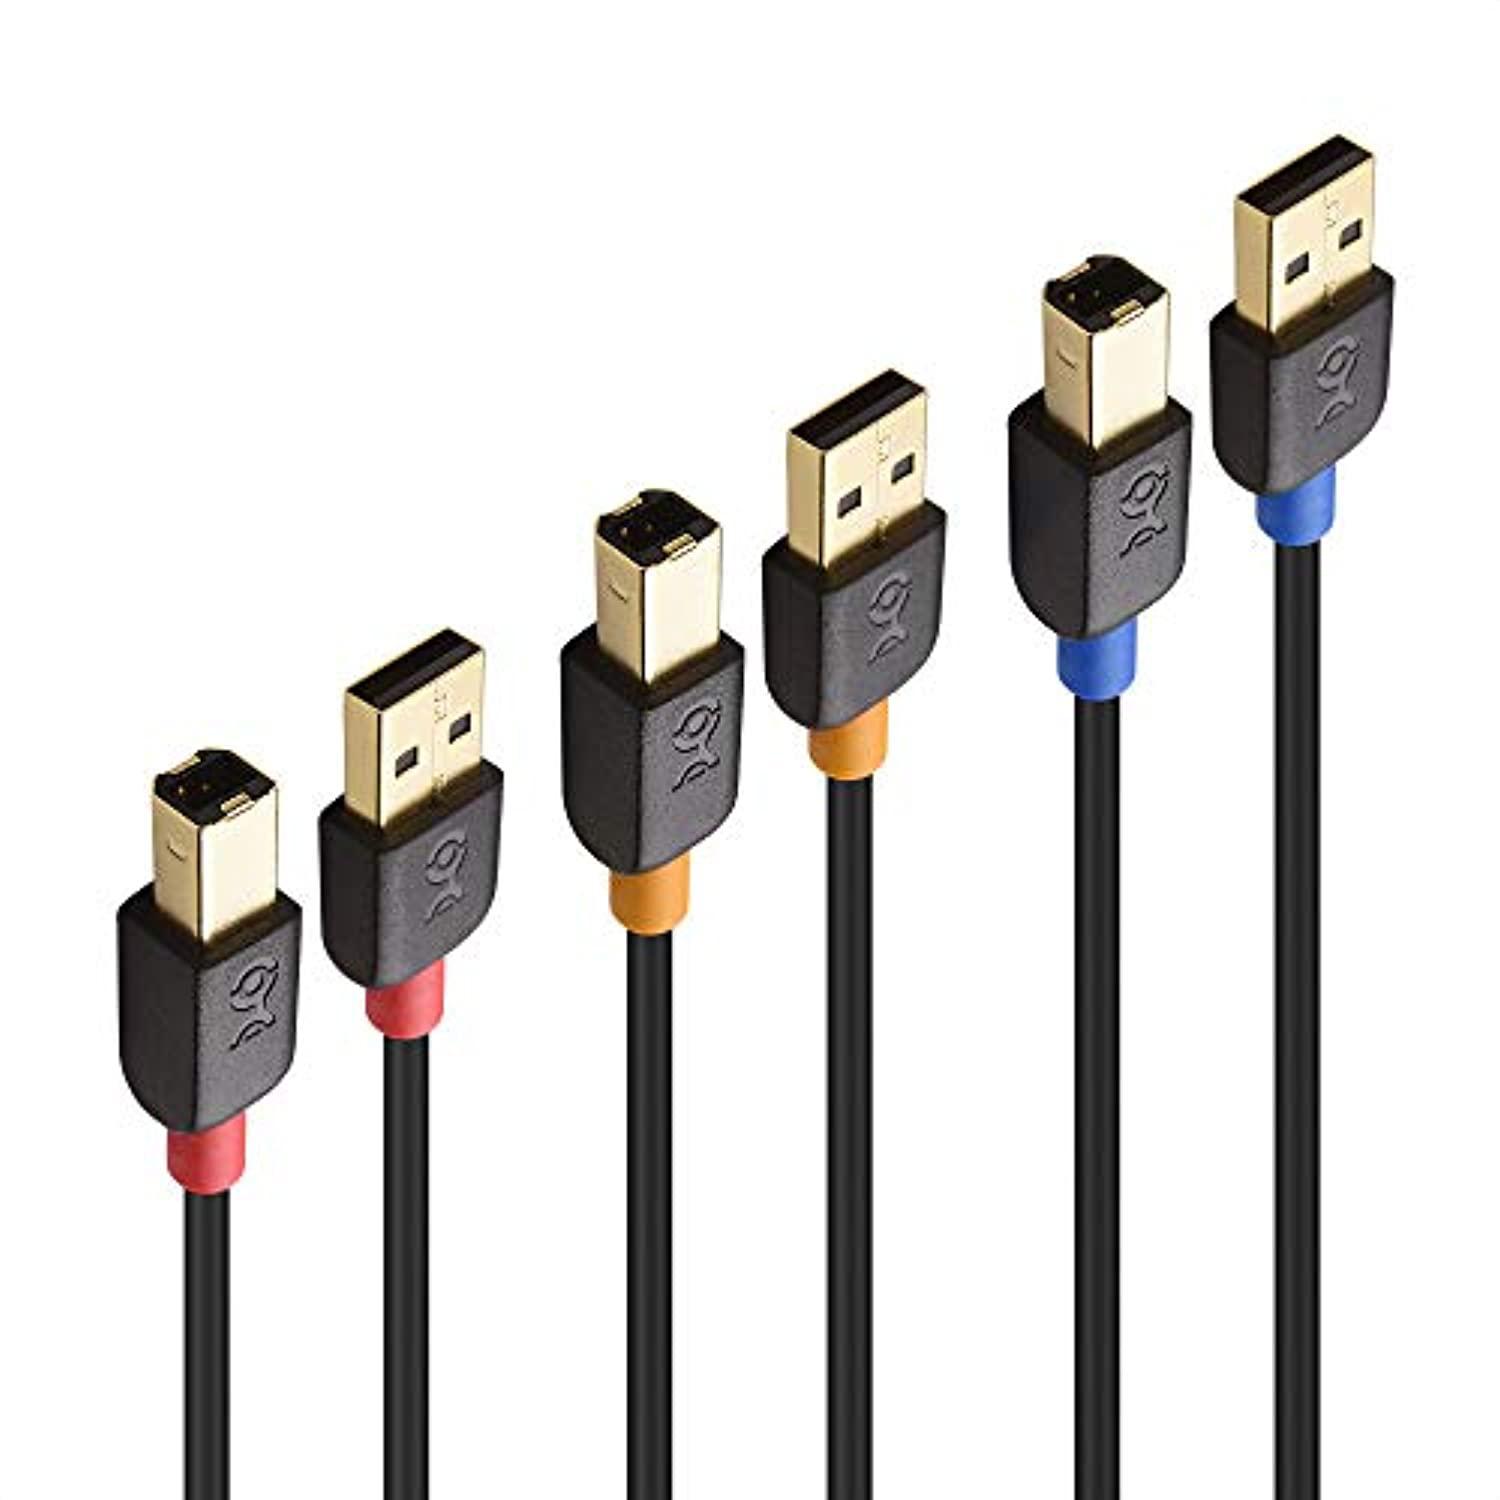 cable matters 3-pack usb cable/usb printer cable 3 ft, usb a to b cable, usb 2.0 cable compatible with printer, midi controll